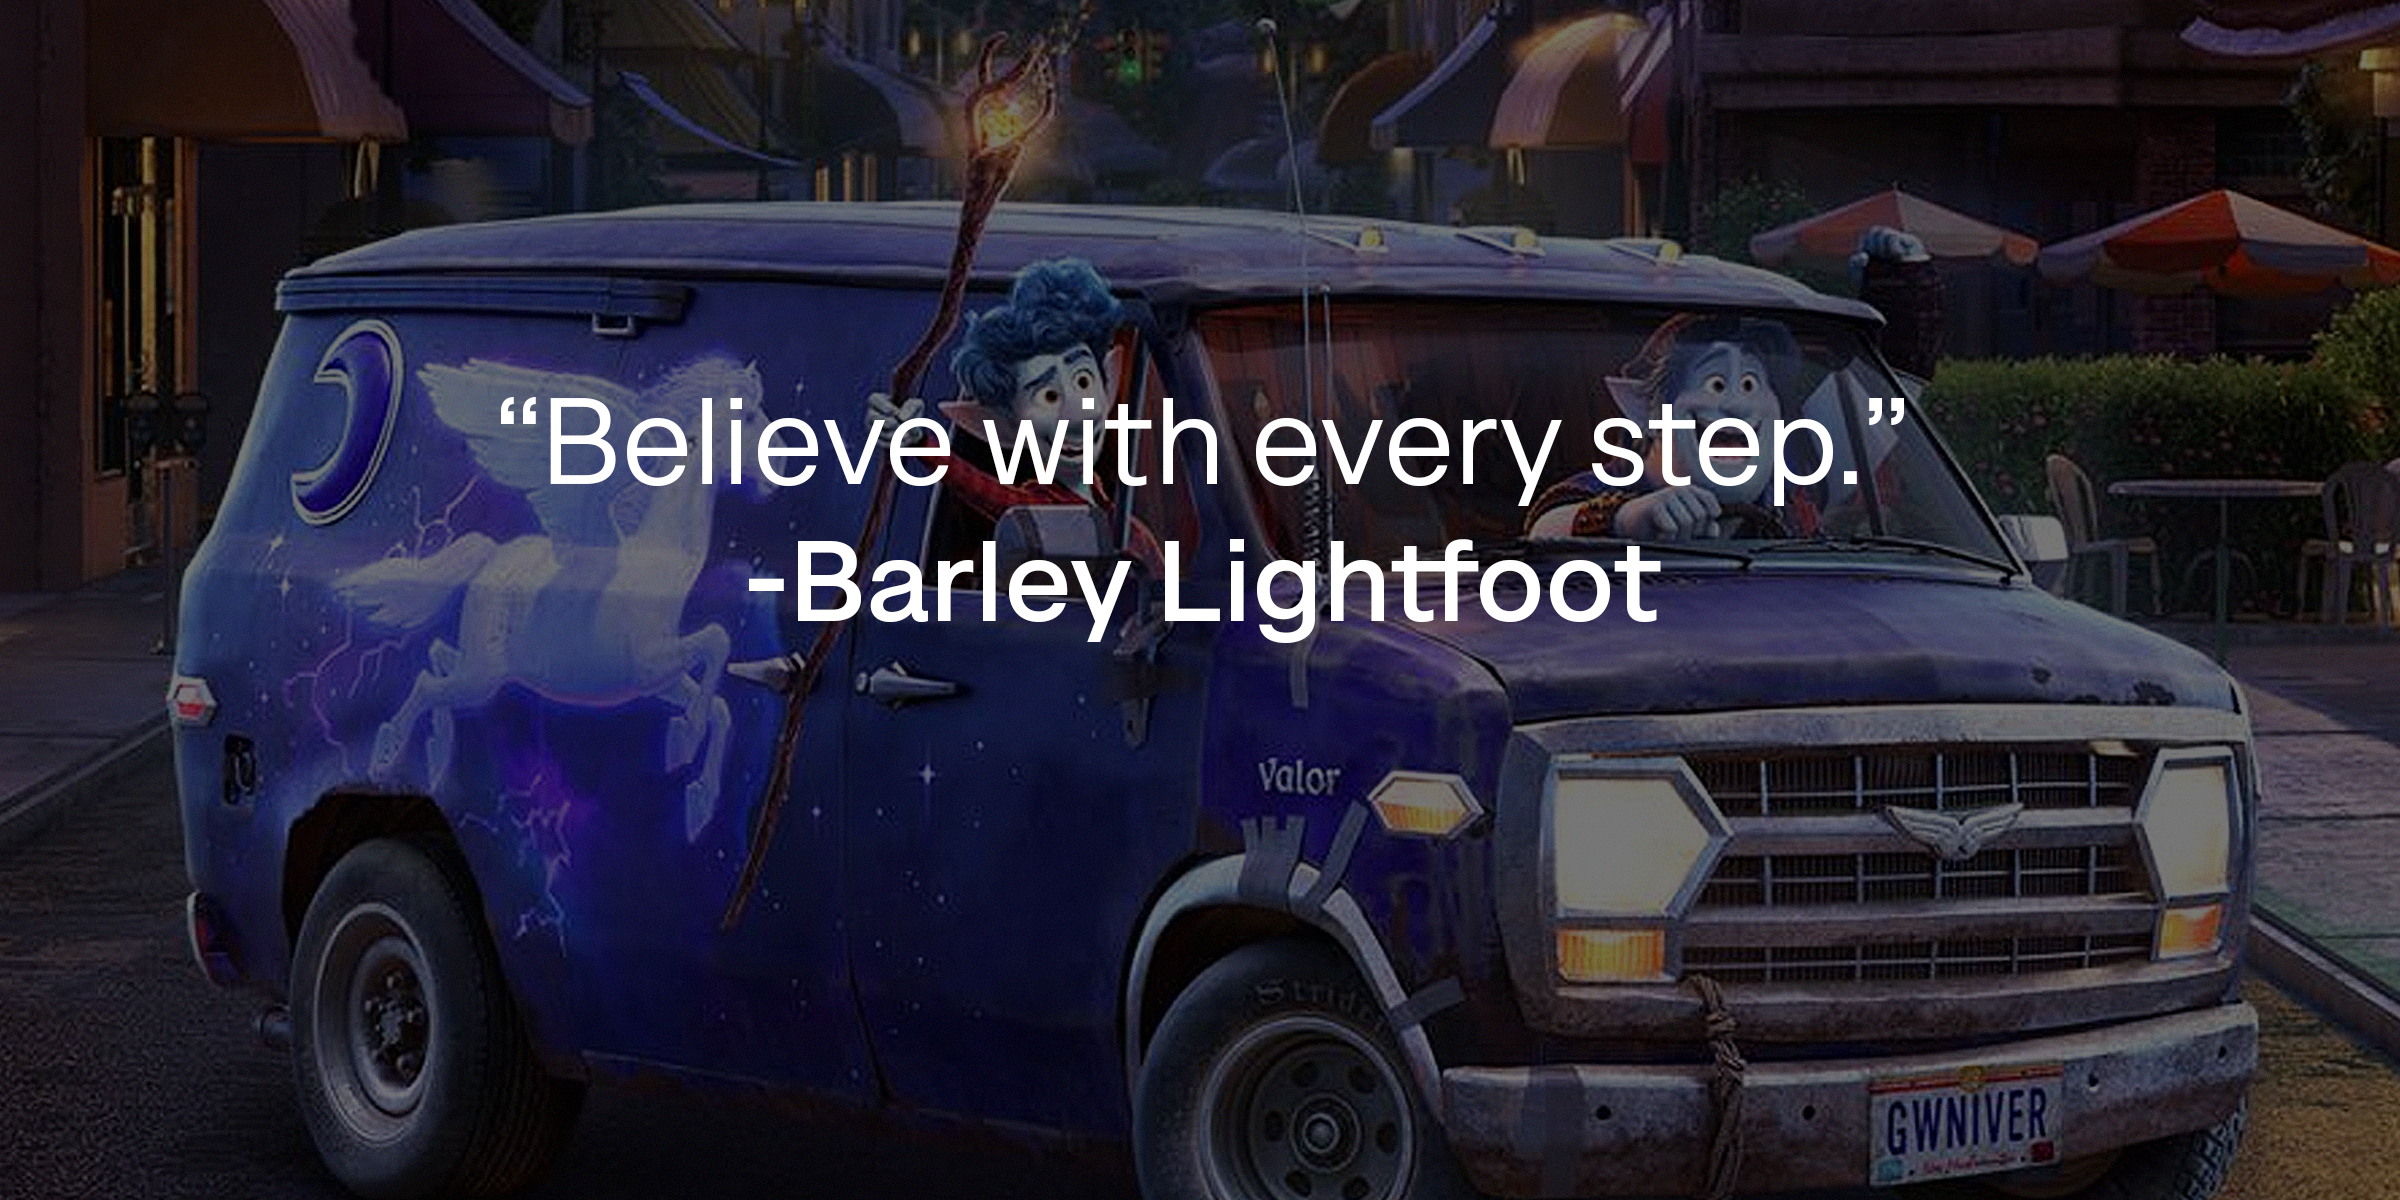 A still from the movie "Onward" with Barley Lightfoot's quote: "Believe with every step." | Source: facebook.com/pixaronward